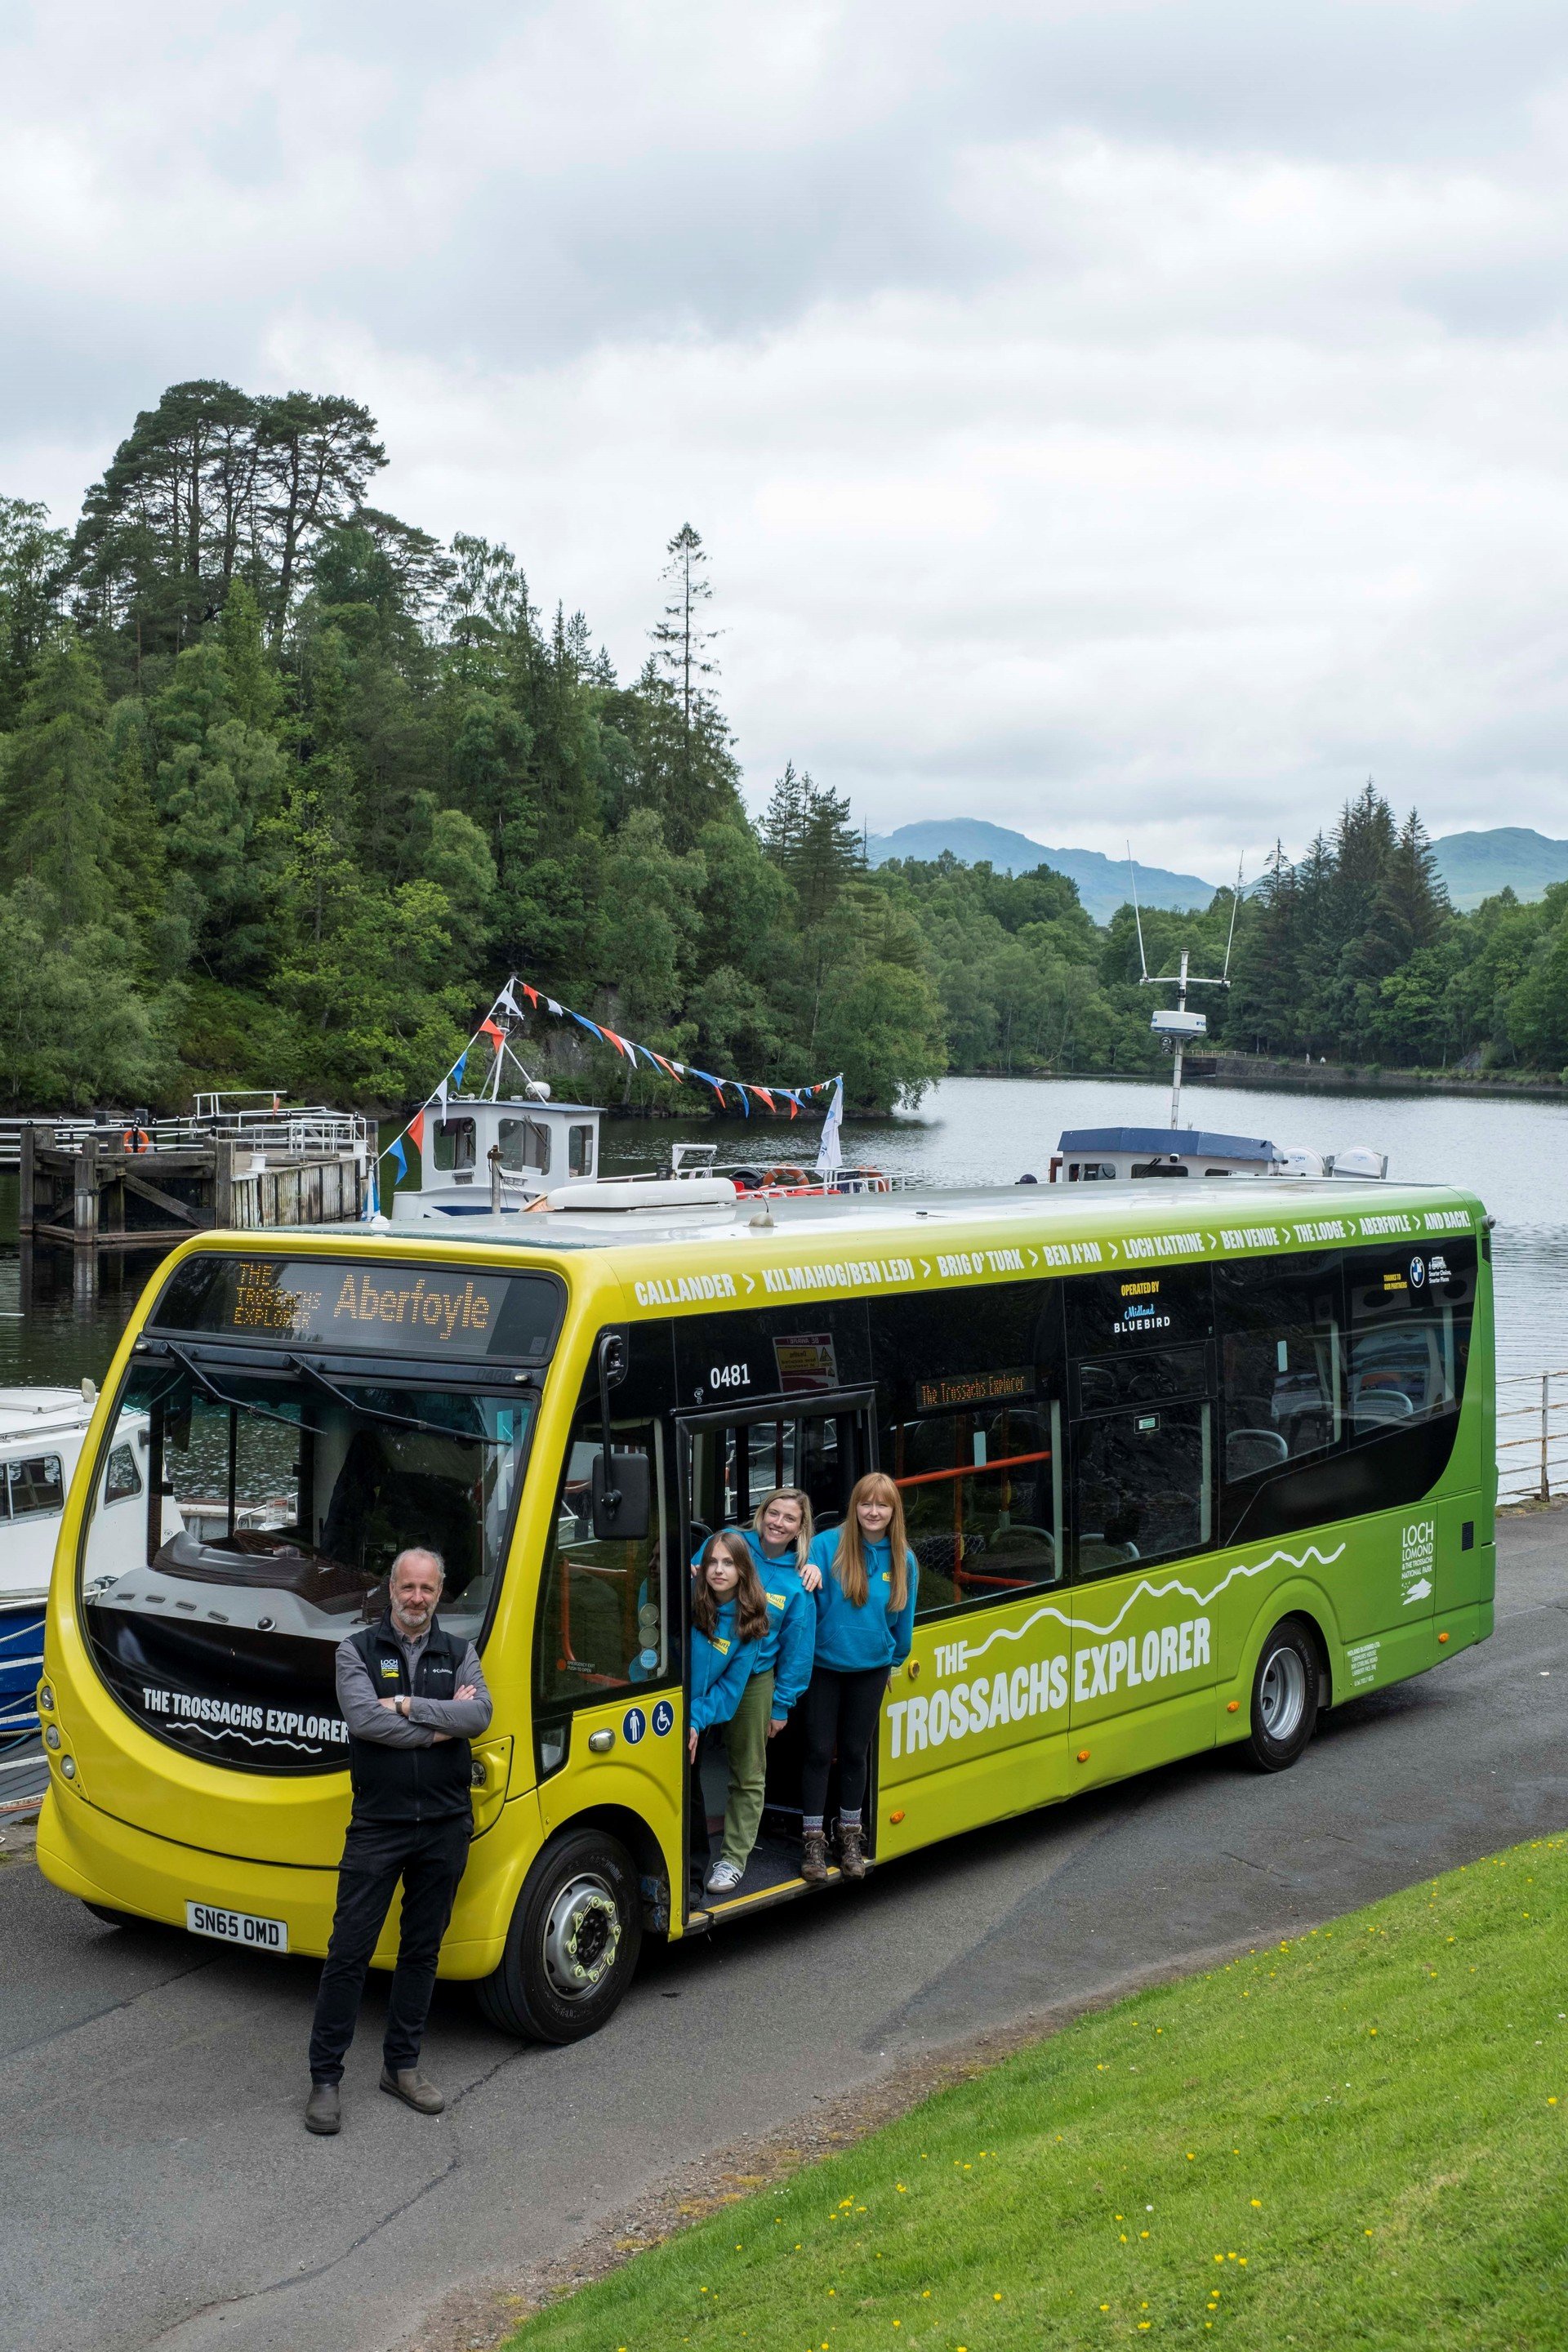 Loch Lomond and The Trossachs National Park bus pilot launched in bid to reduce emissions and congestion.